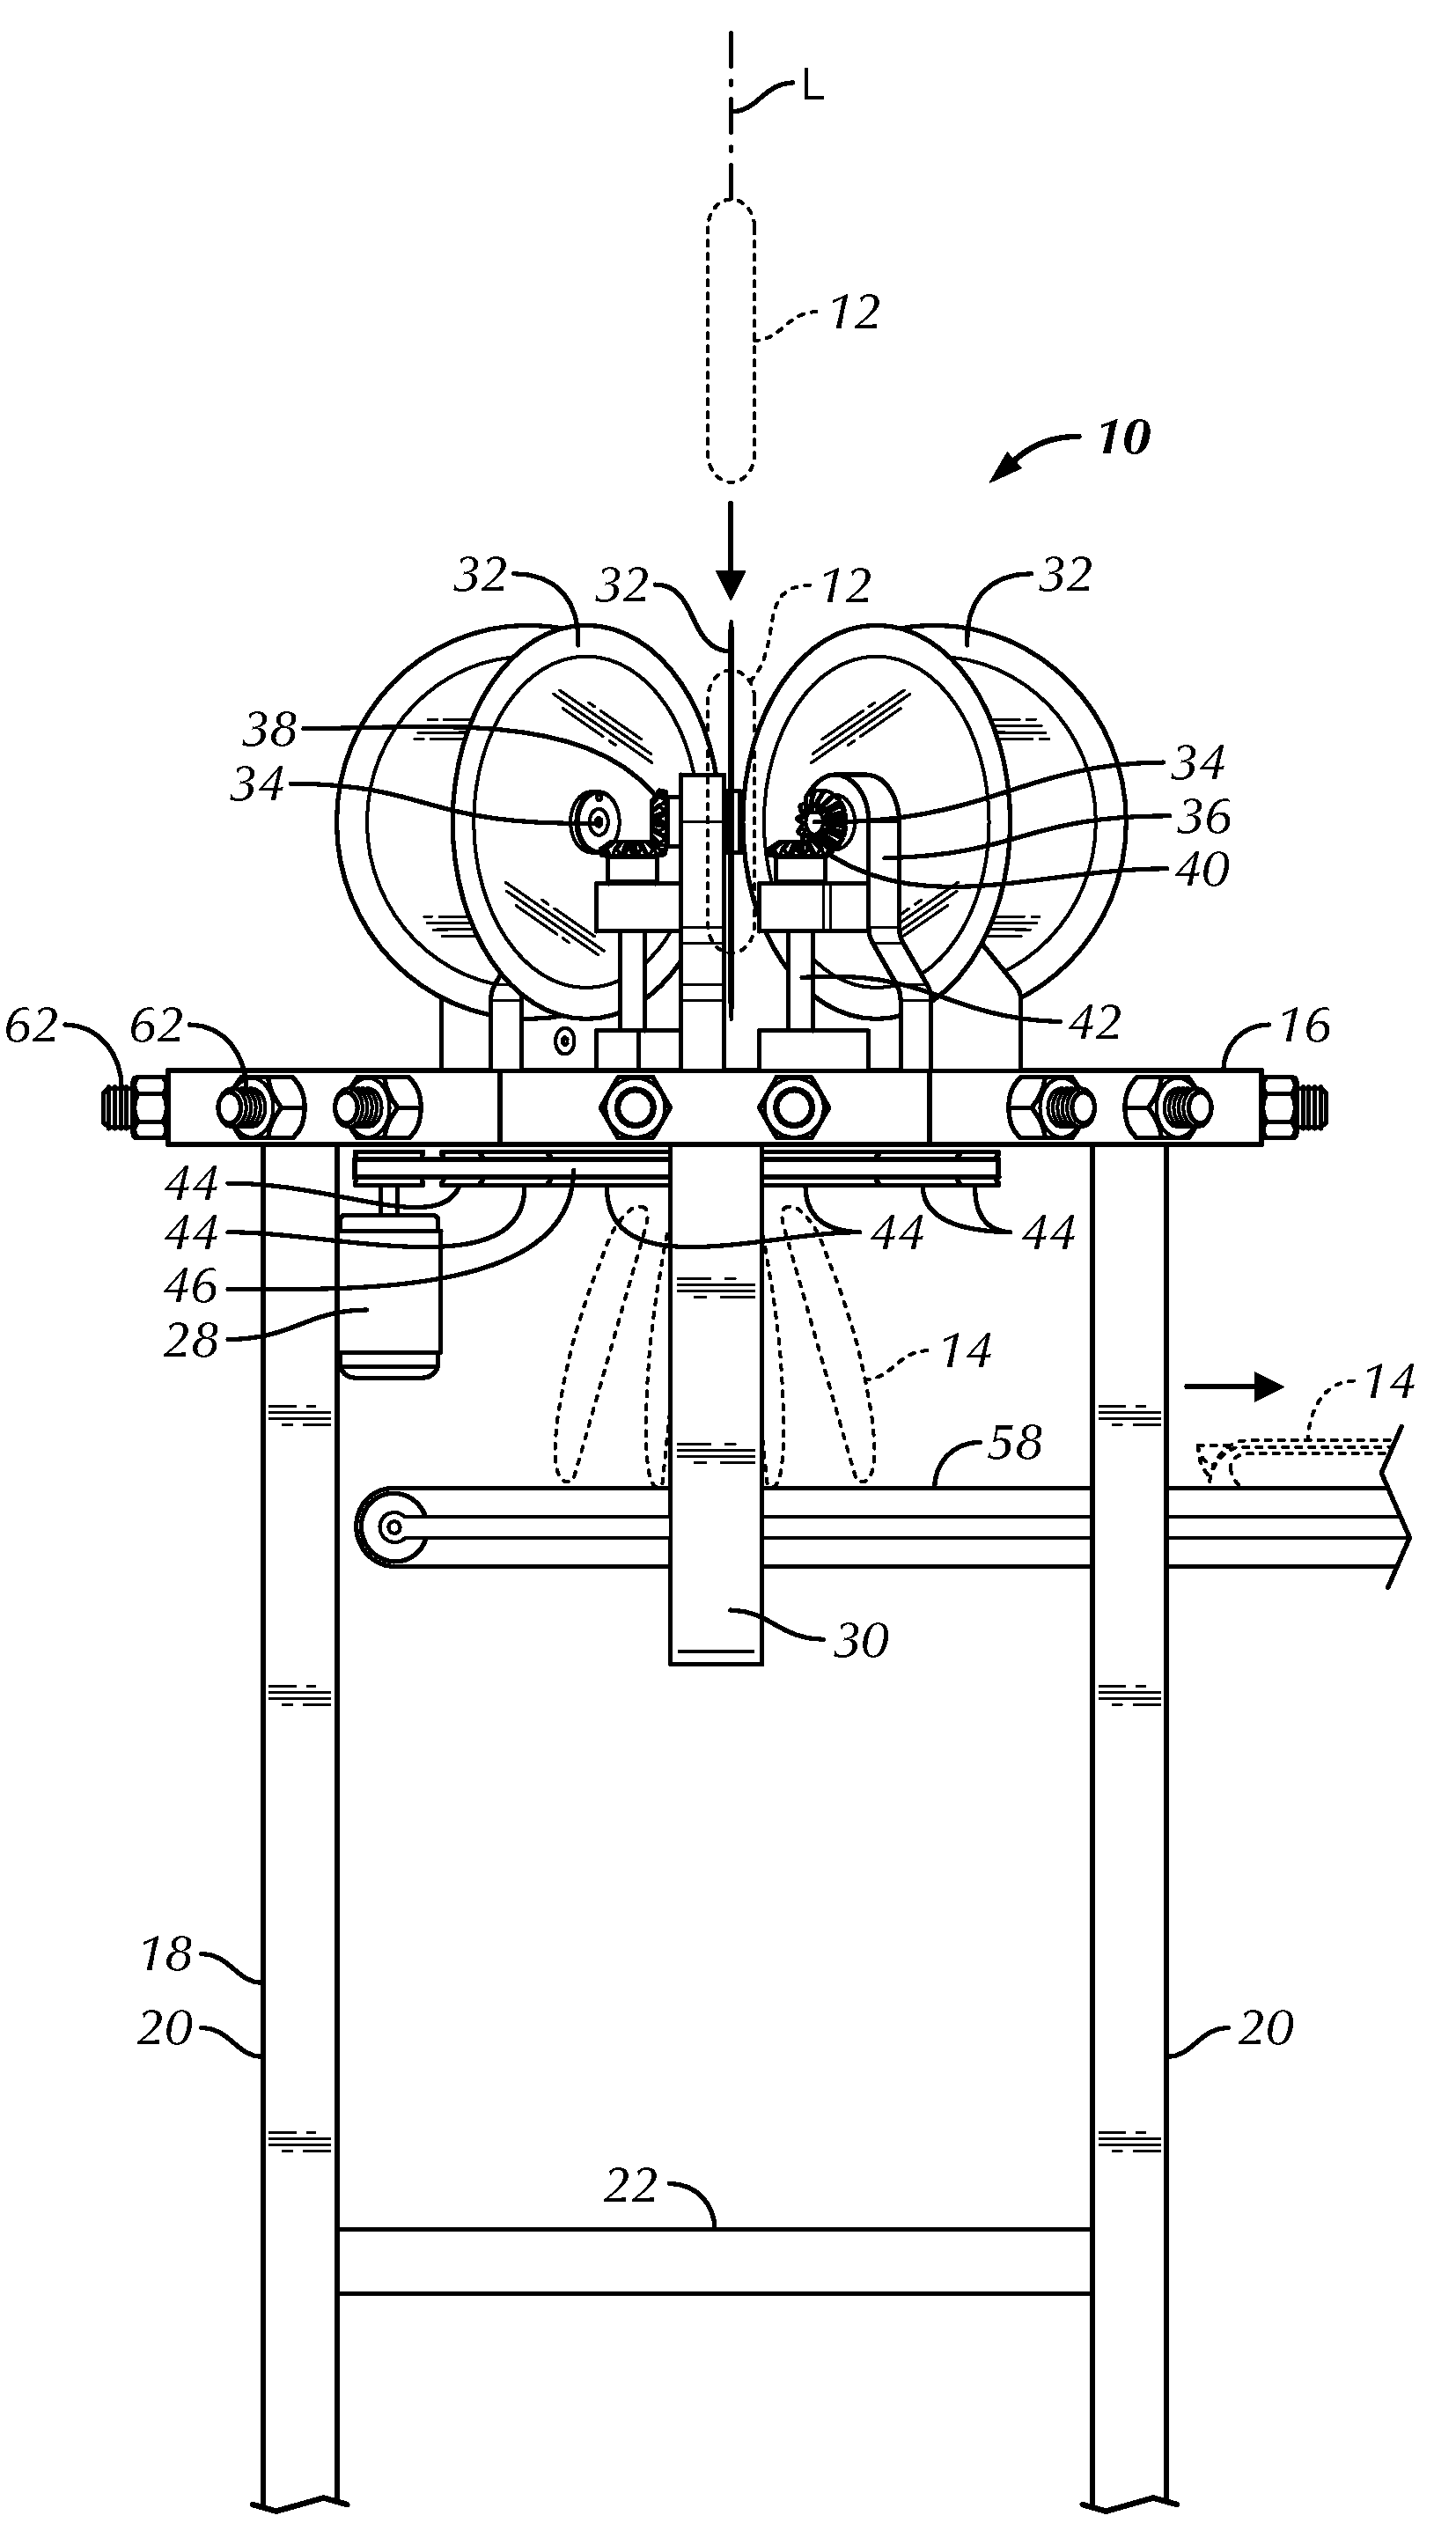 Apparatus for cutting elongated meat